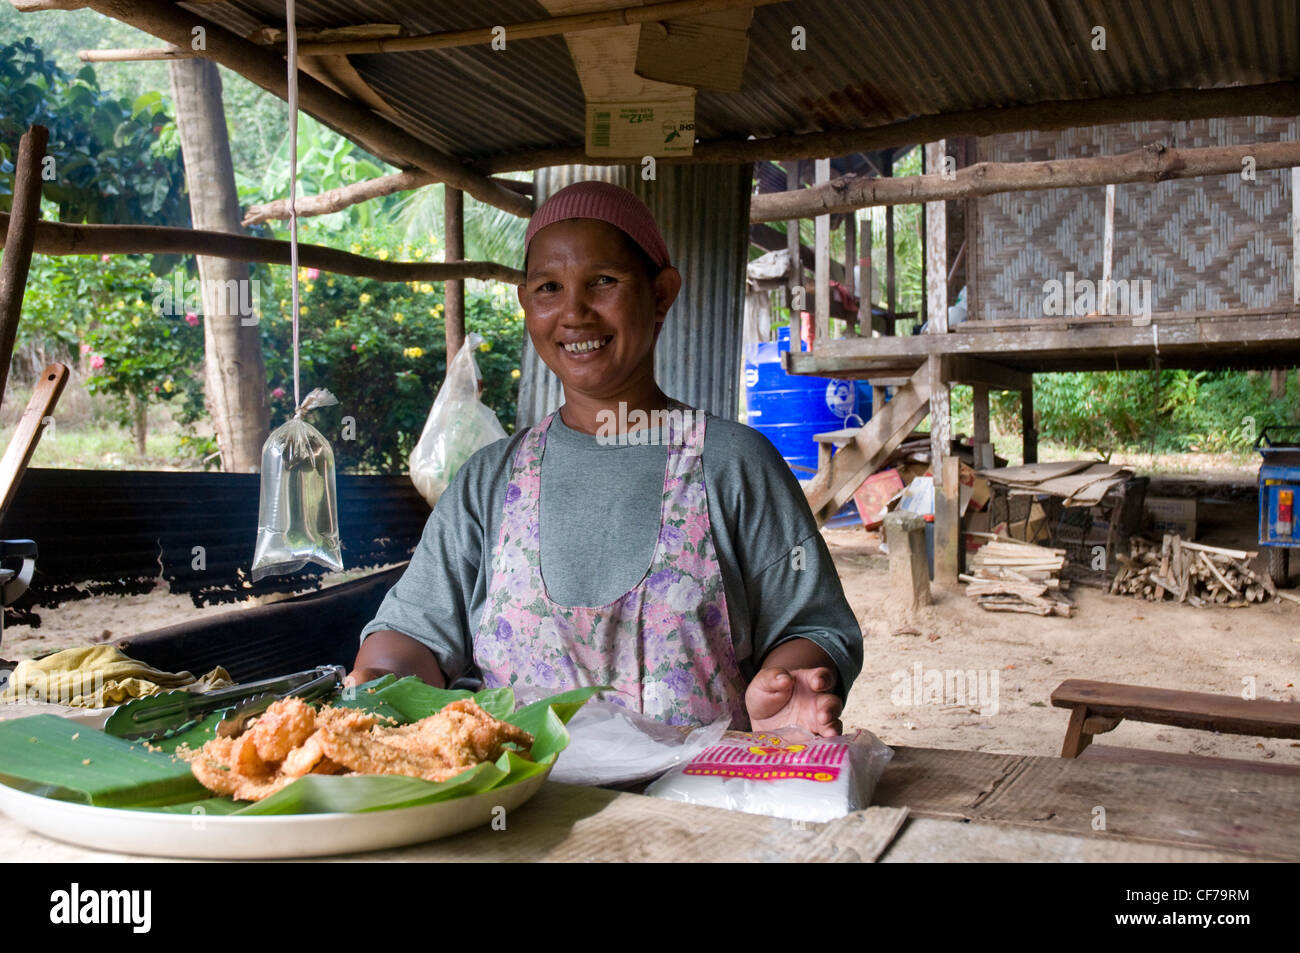 Woman serving traditional Thai food from a beach cafe, Koh Bulon, Thailand Stock Photo